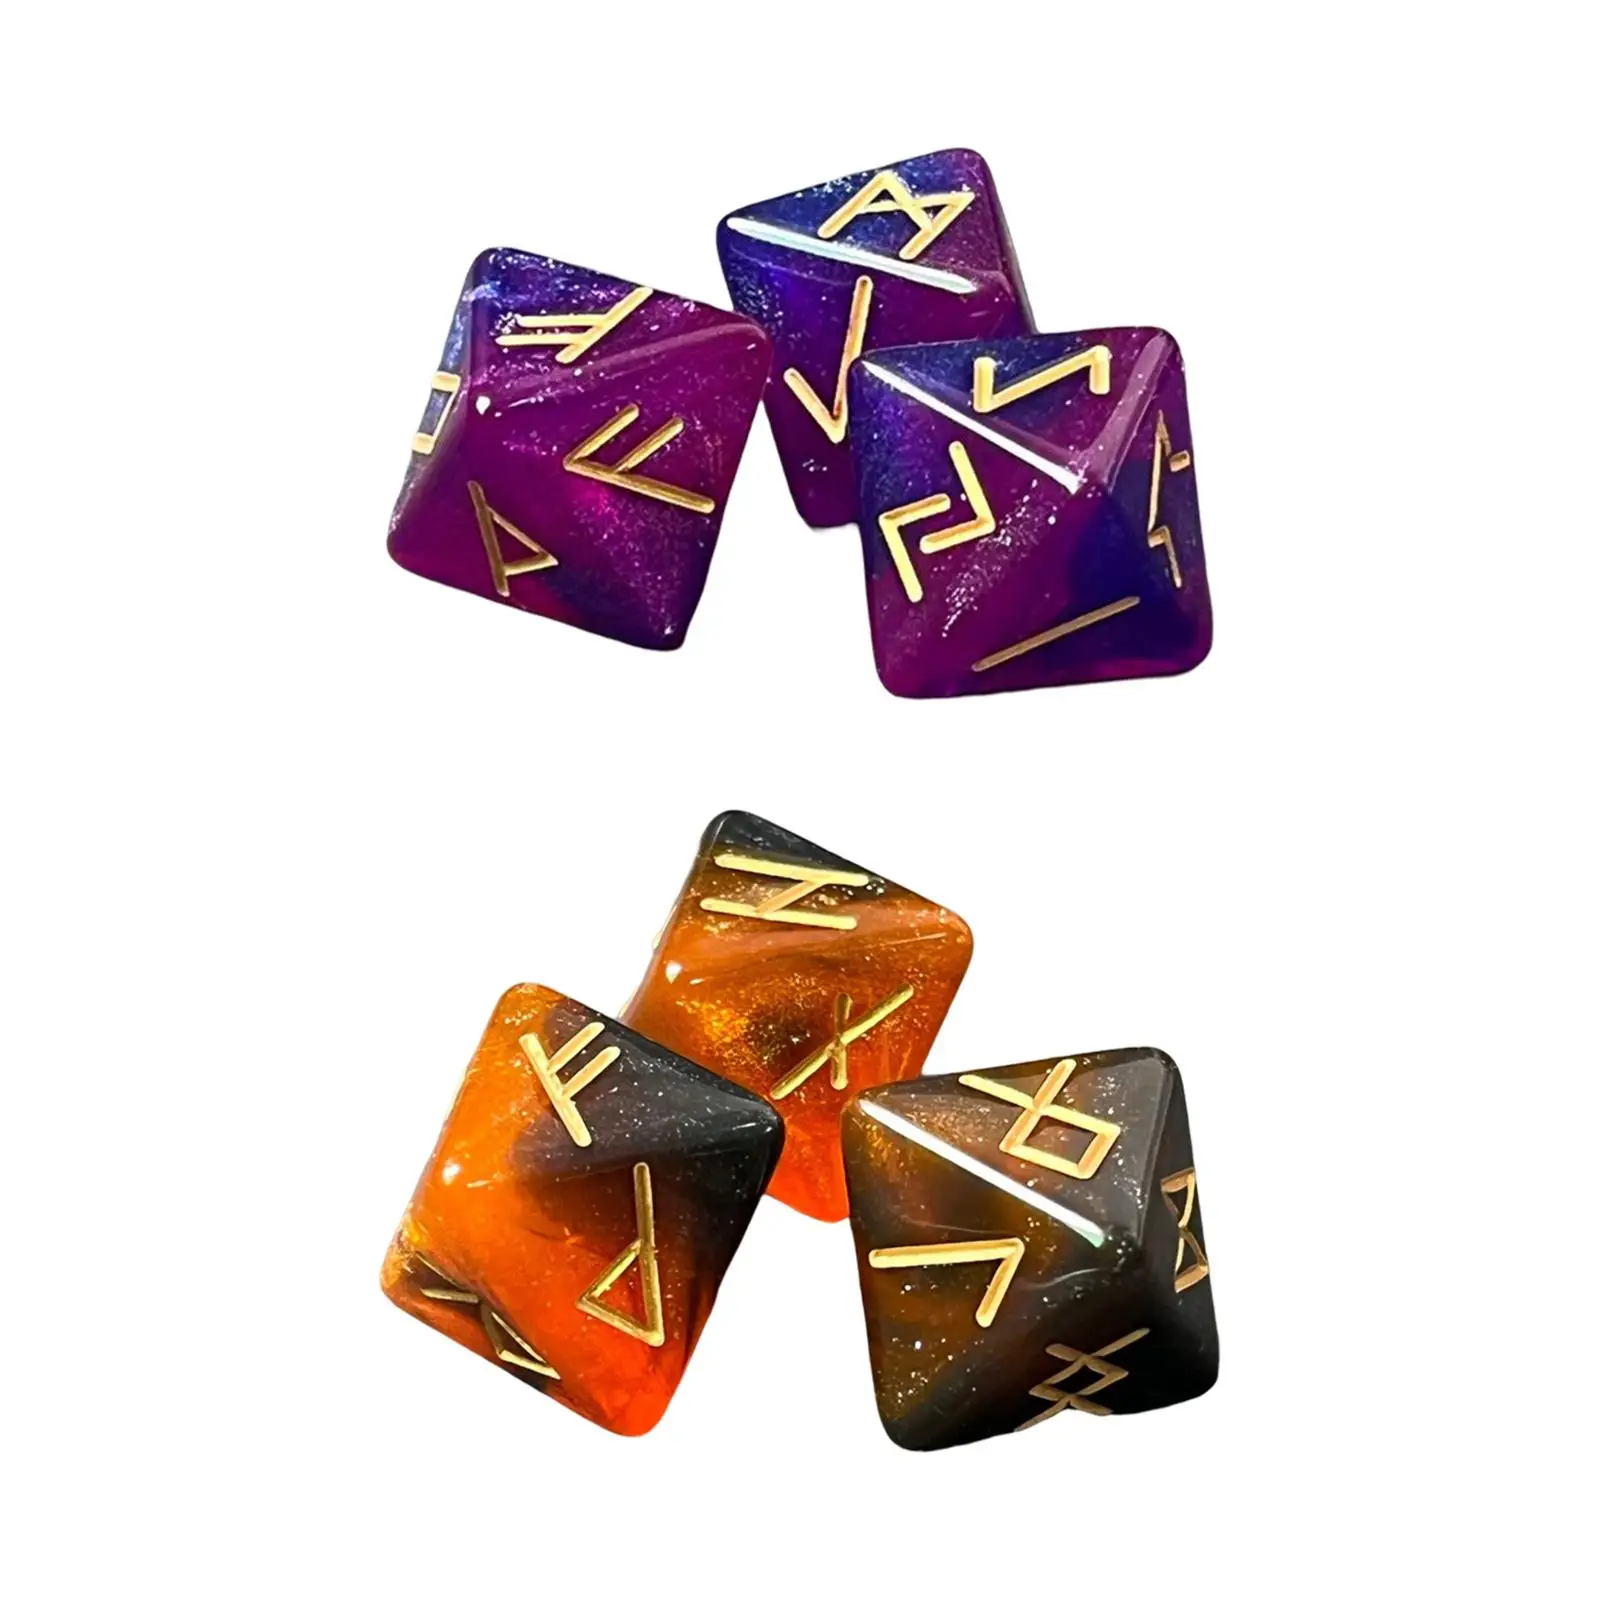 3Pcs Star Divination Tarot Constellation Rune Dice Assorted Polyhedral Dice Set Multi Sided Astrological Dice for Accessory